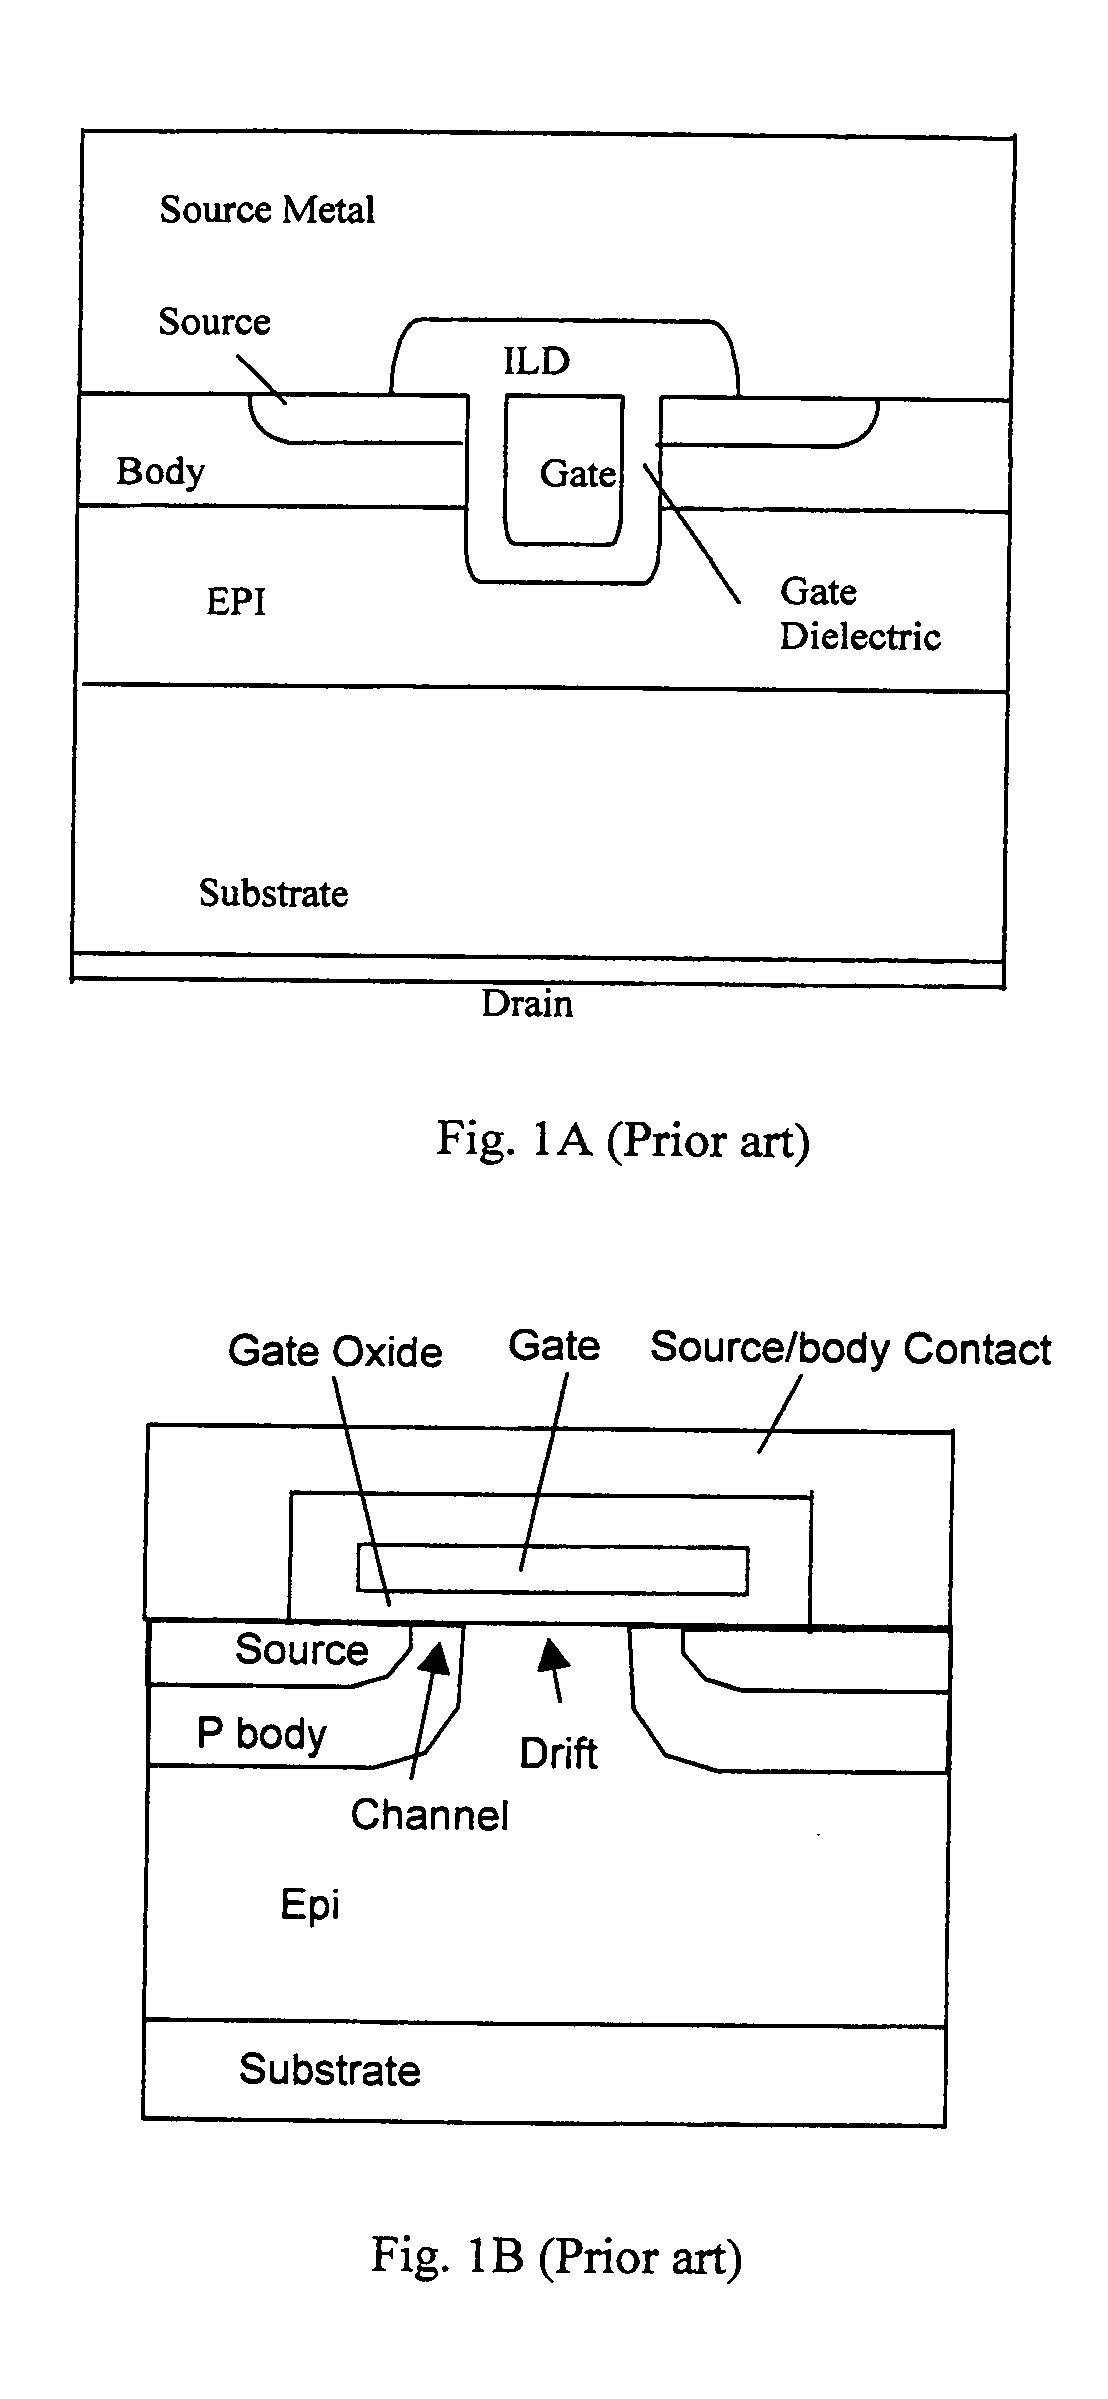 Inverted-trench grounded-source fet structure using conductive substrates, with highly doped substrates